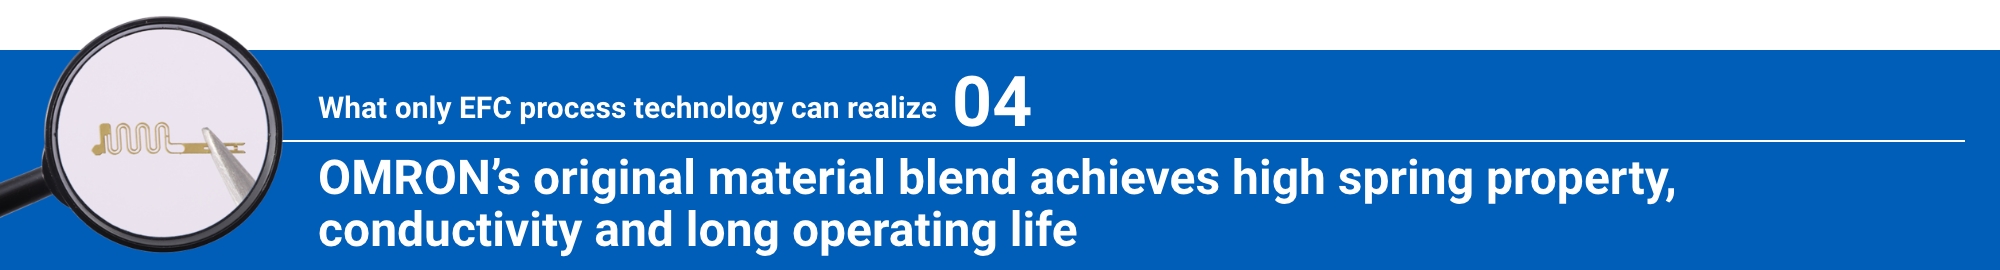 What only EFC process technology can realize 04: OMRON’s original material blend achieves high spring property, conductivity and long operating life